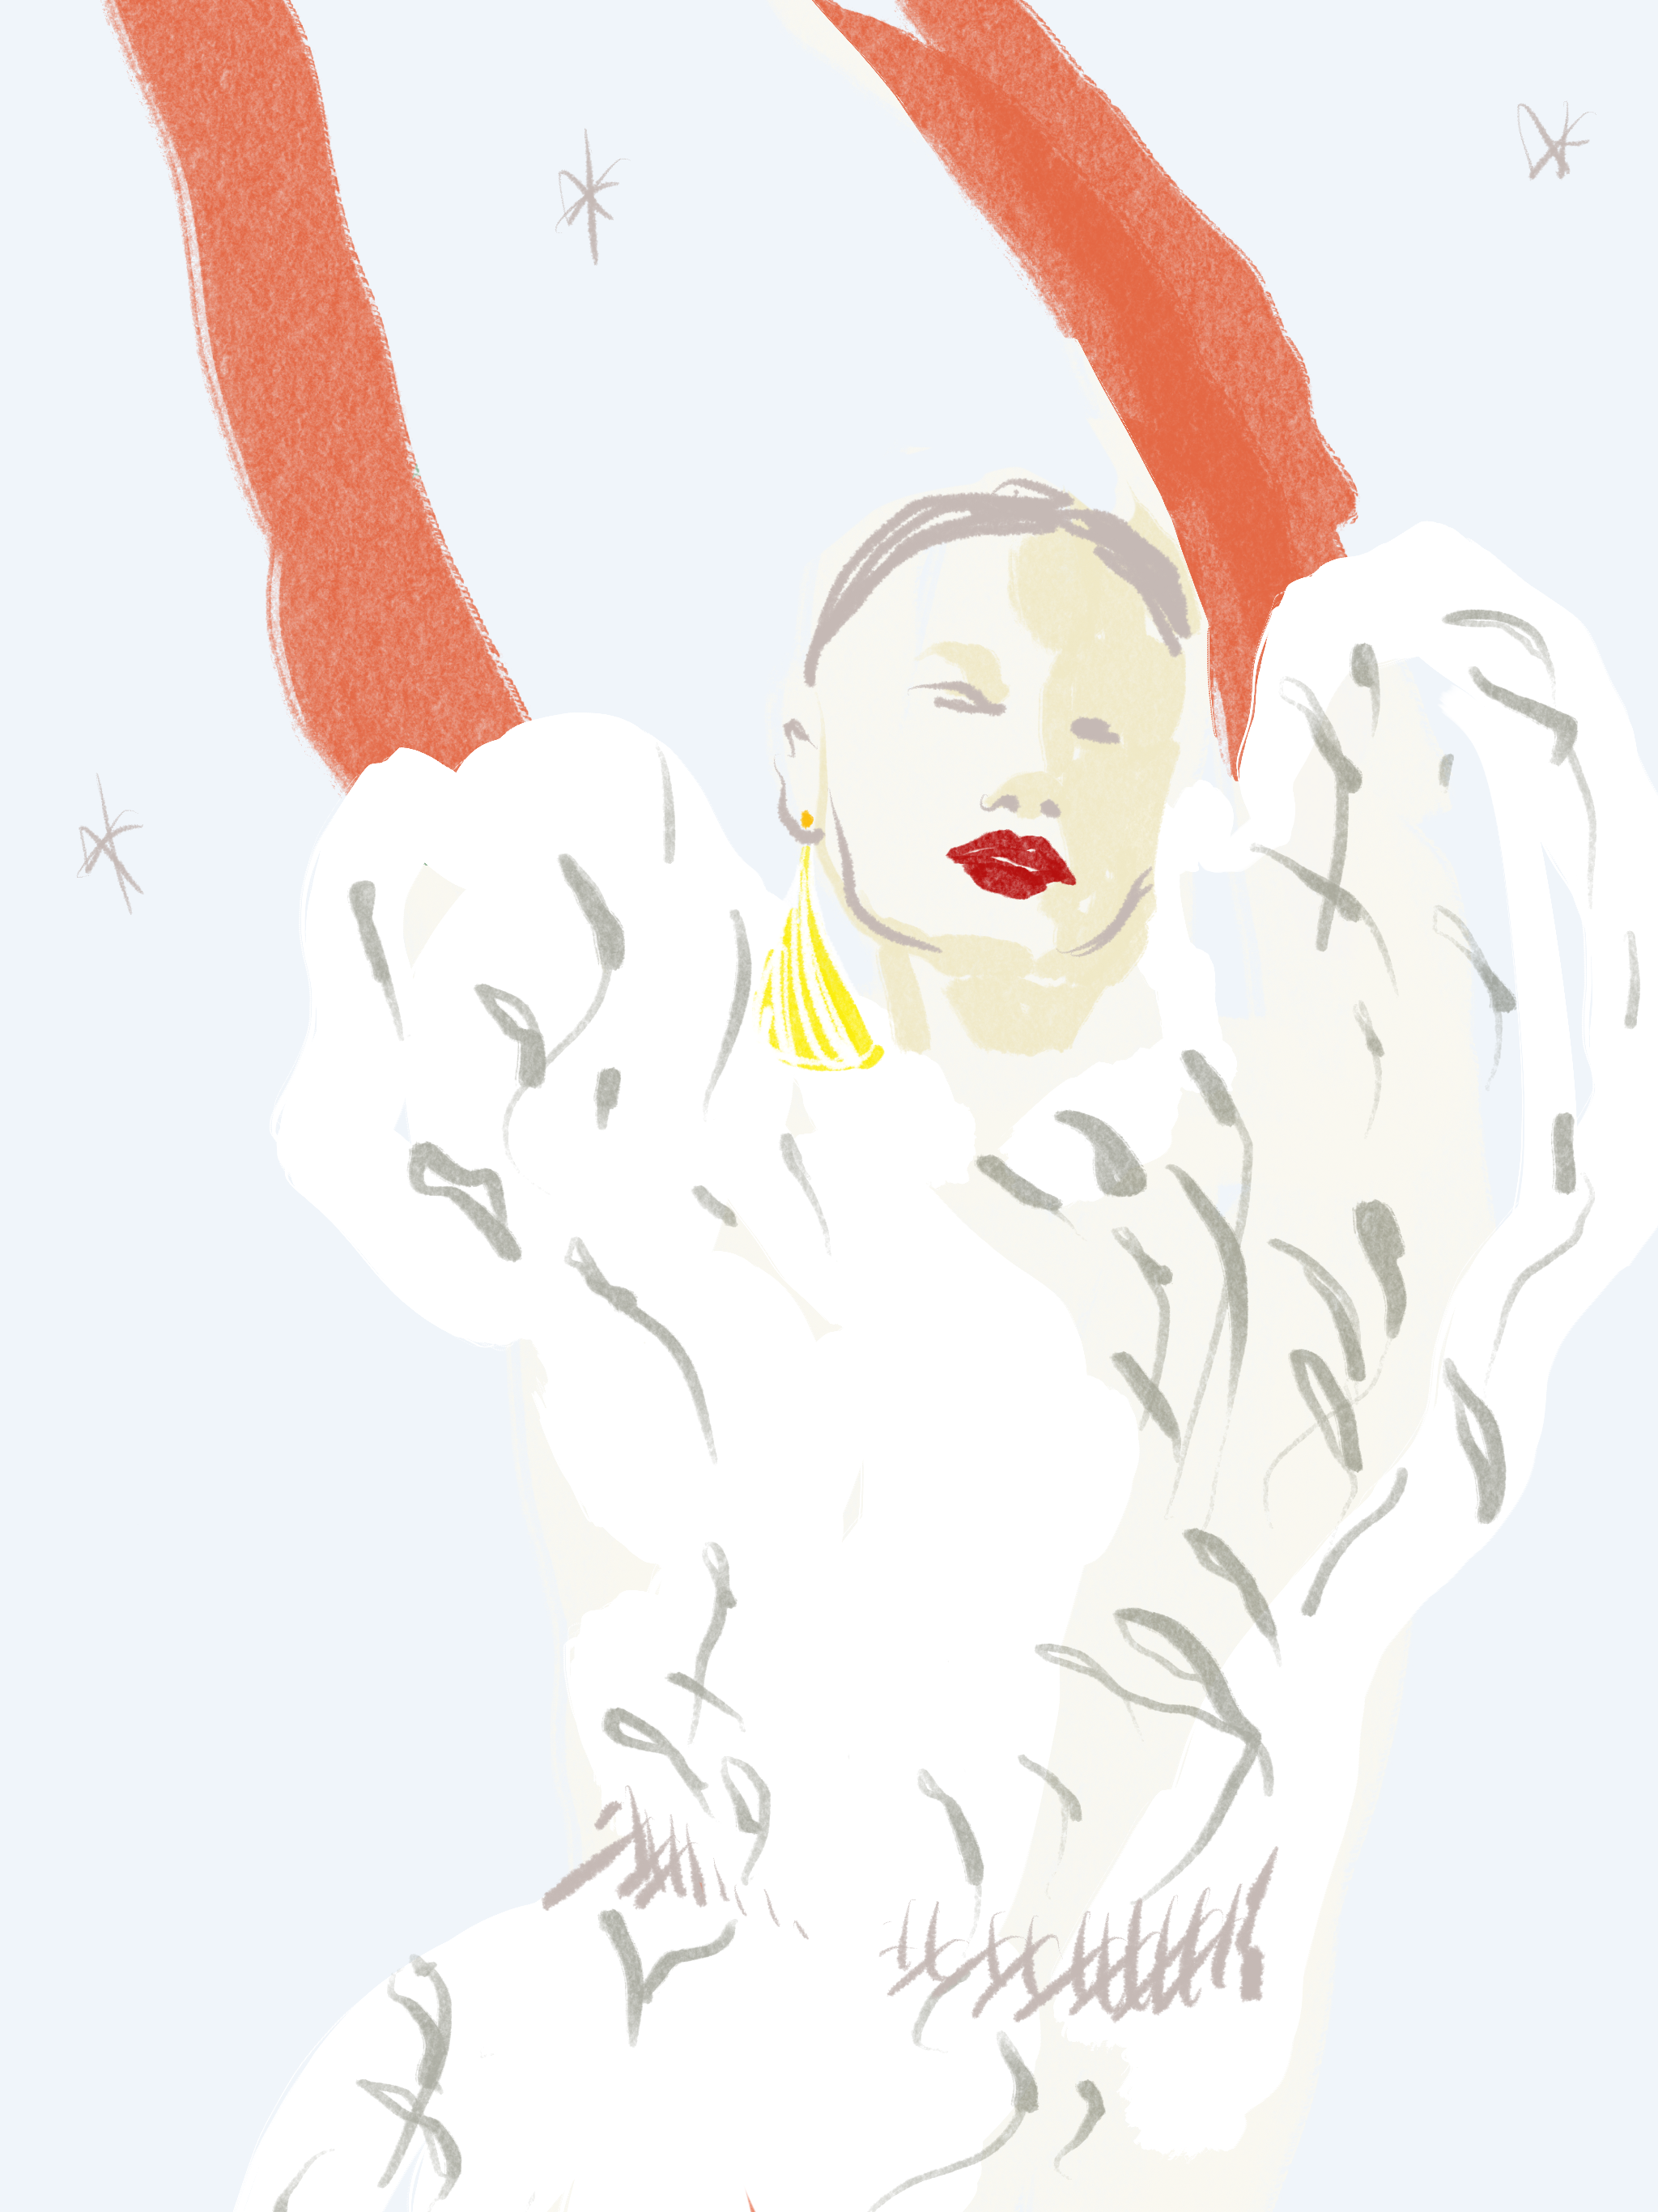 Girl with hands up, Fashion Illustration by Silvana Mariani